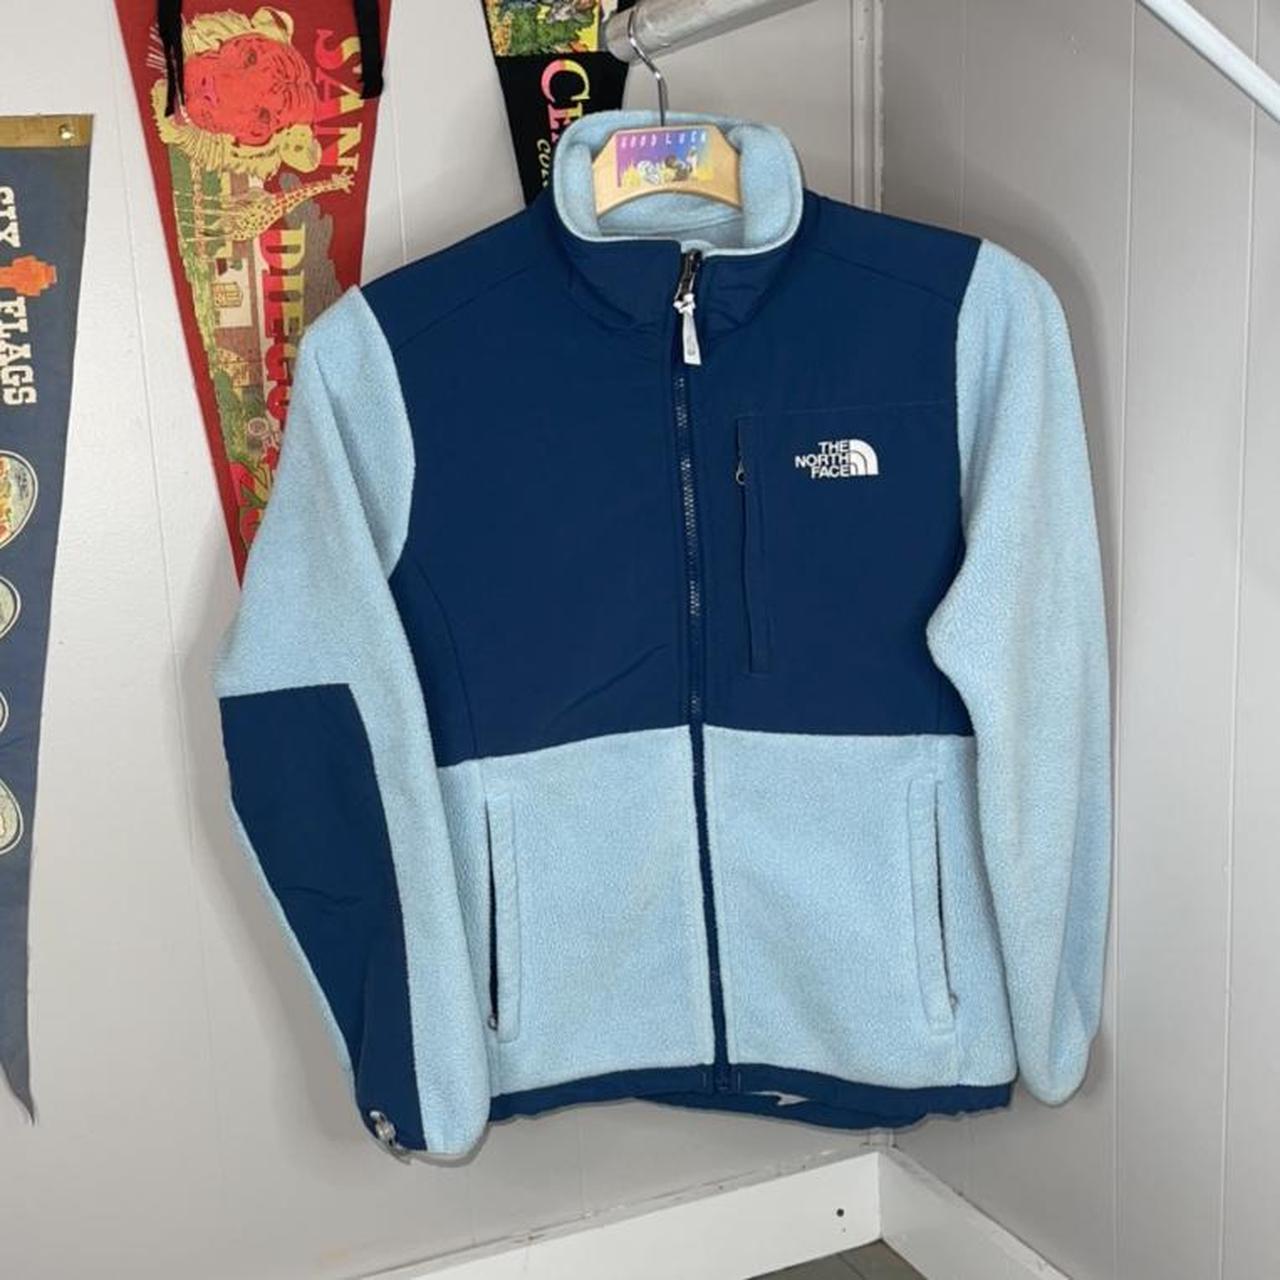 Product Image 1 - The North Face Denali Fleece